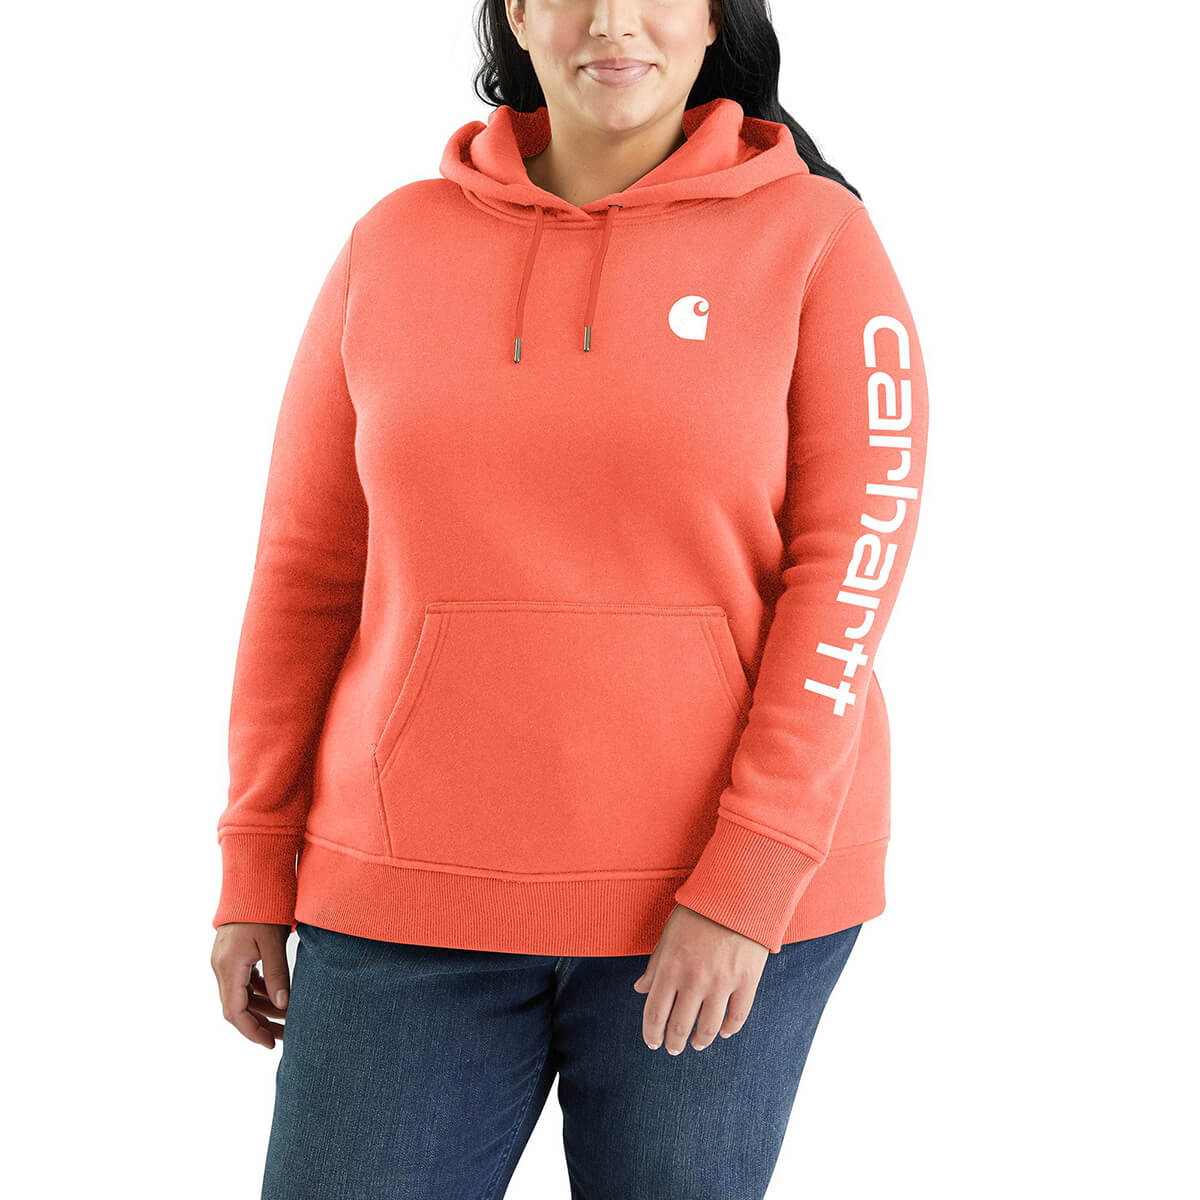 Carhartt Relaxed Fit Midweight Logo Sleeve Graphic Sweatshirt - Coral